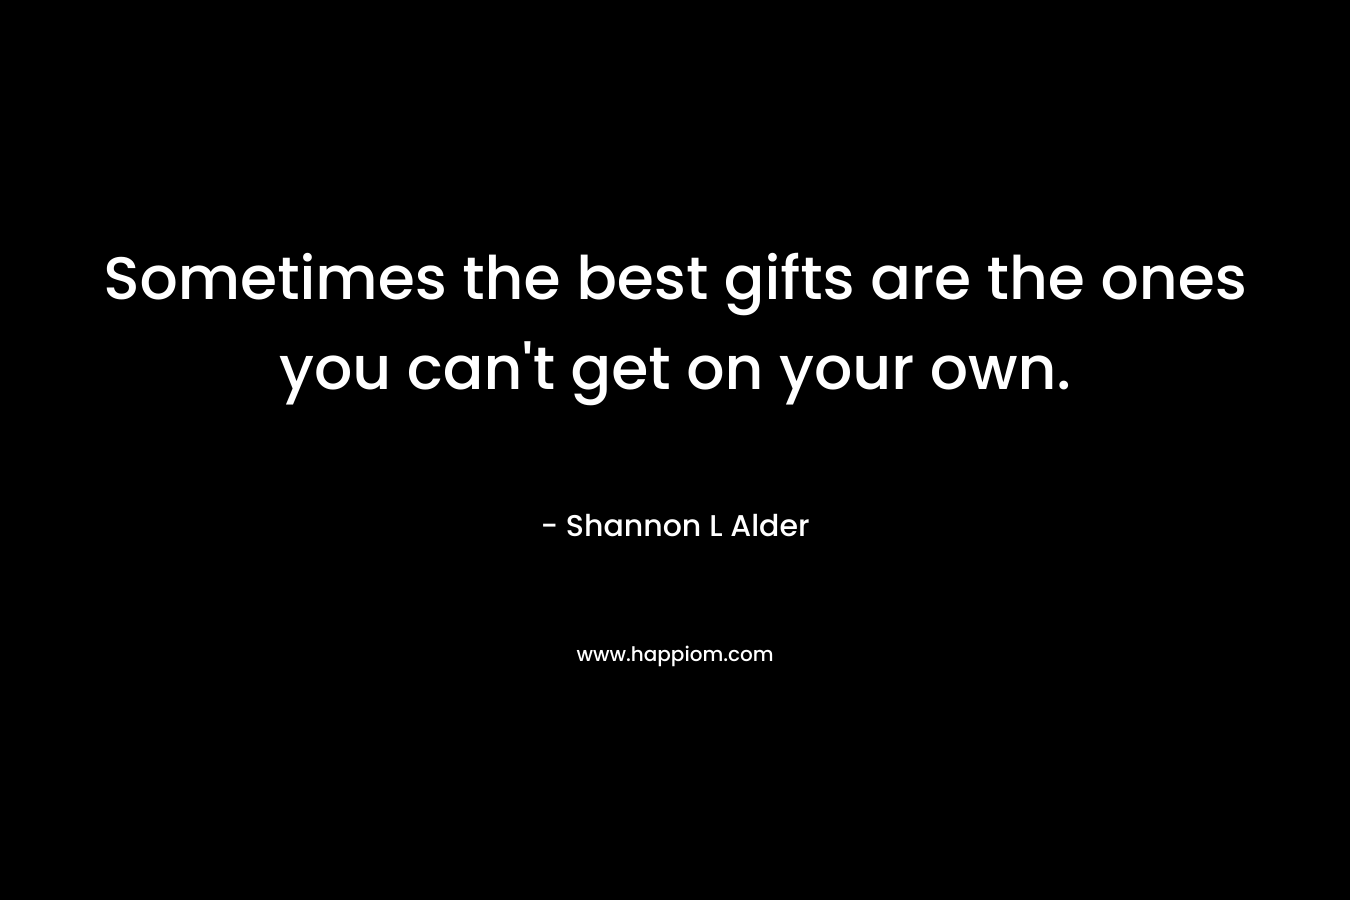 Sometimes the best gifts are the ones you can’t get on your own. – Shannon L Alder